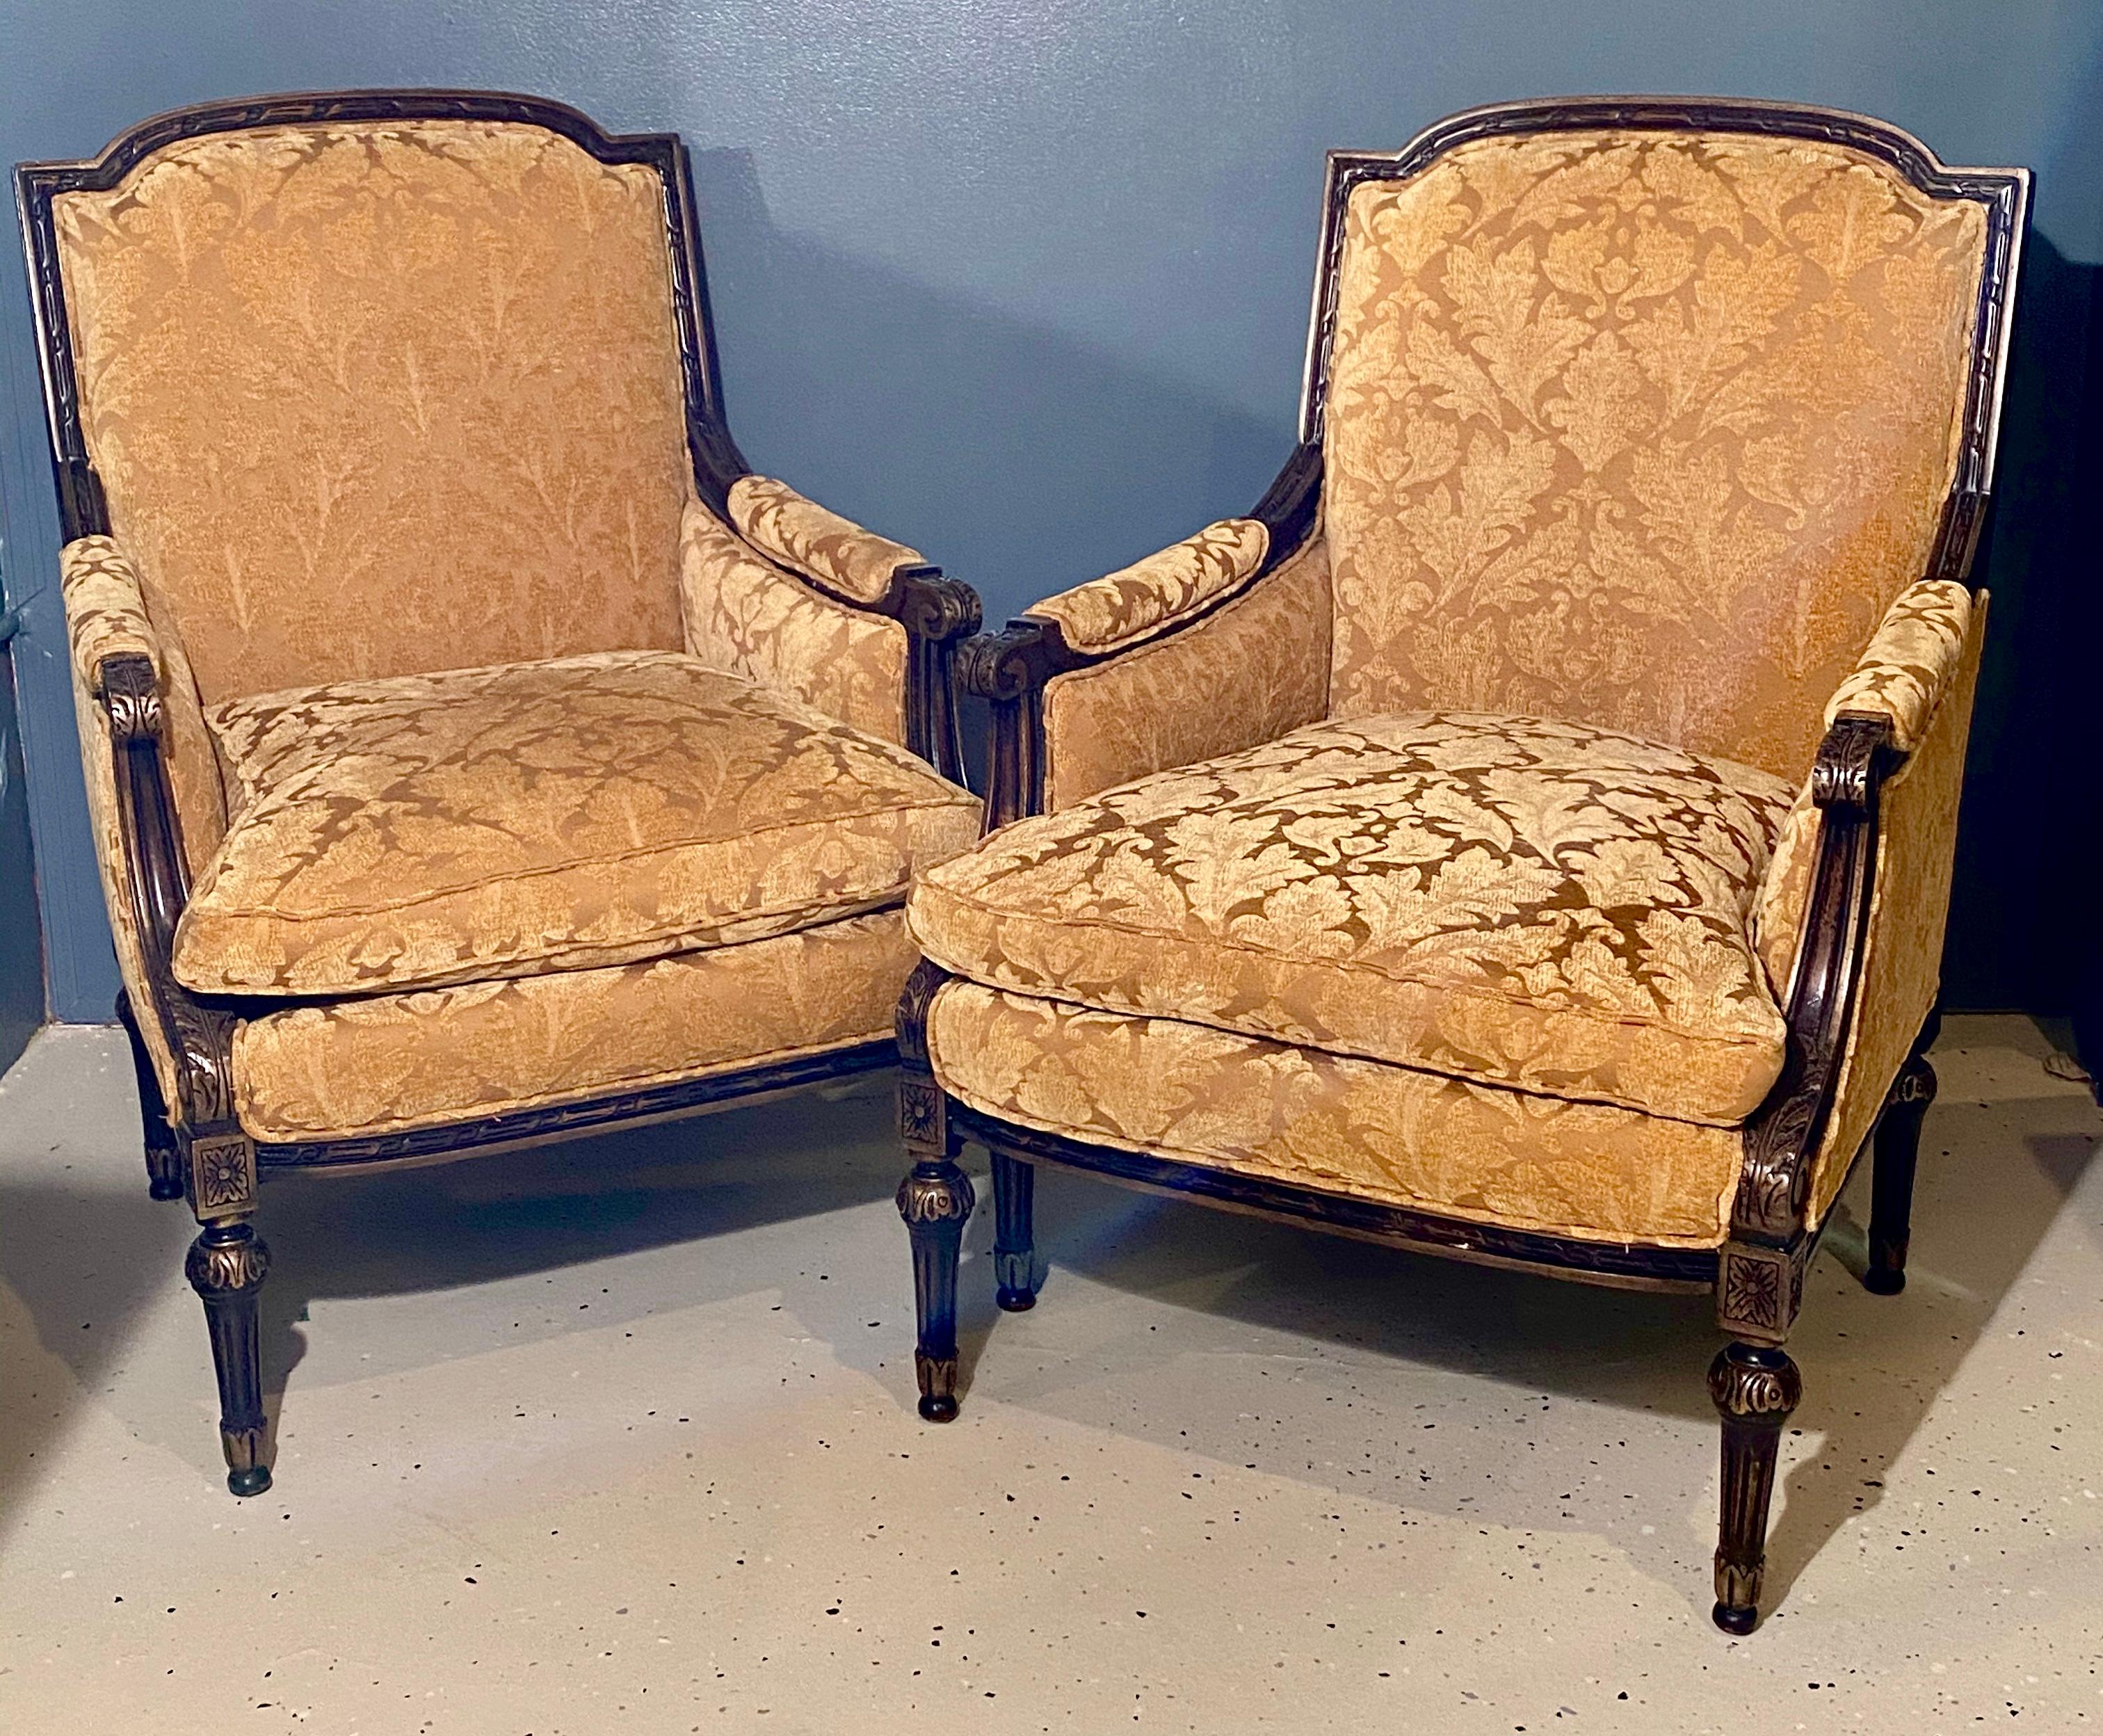 Pair of Jansen style Fauteuils or armchairs each having the Louis XVI form with sculptured velvet fabric The pair finely upholstered in gold velvet having a foliate damask pattern, with padded armrests, most likely from Scalamandre. Each with curved